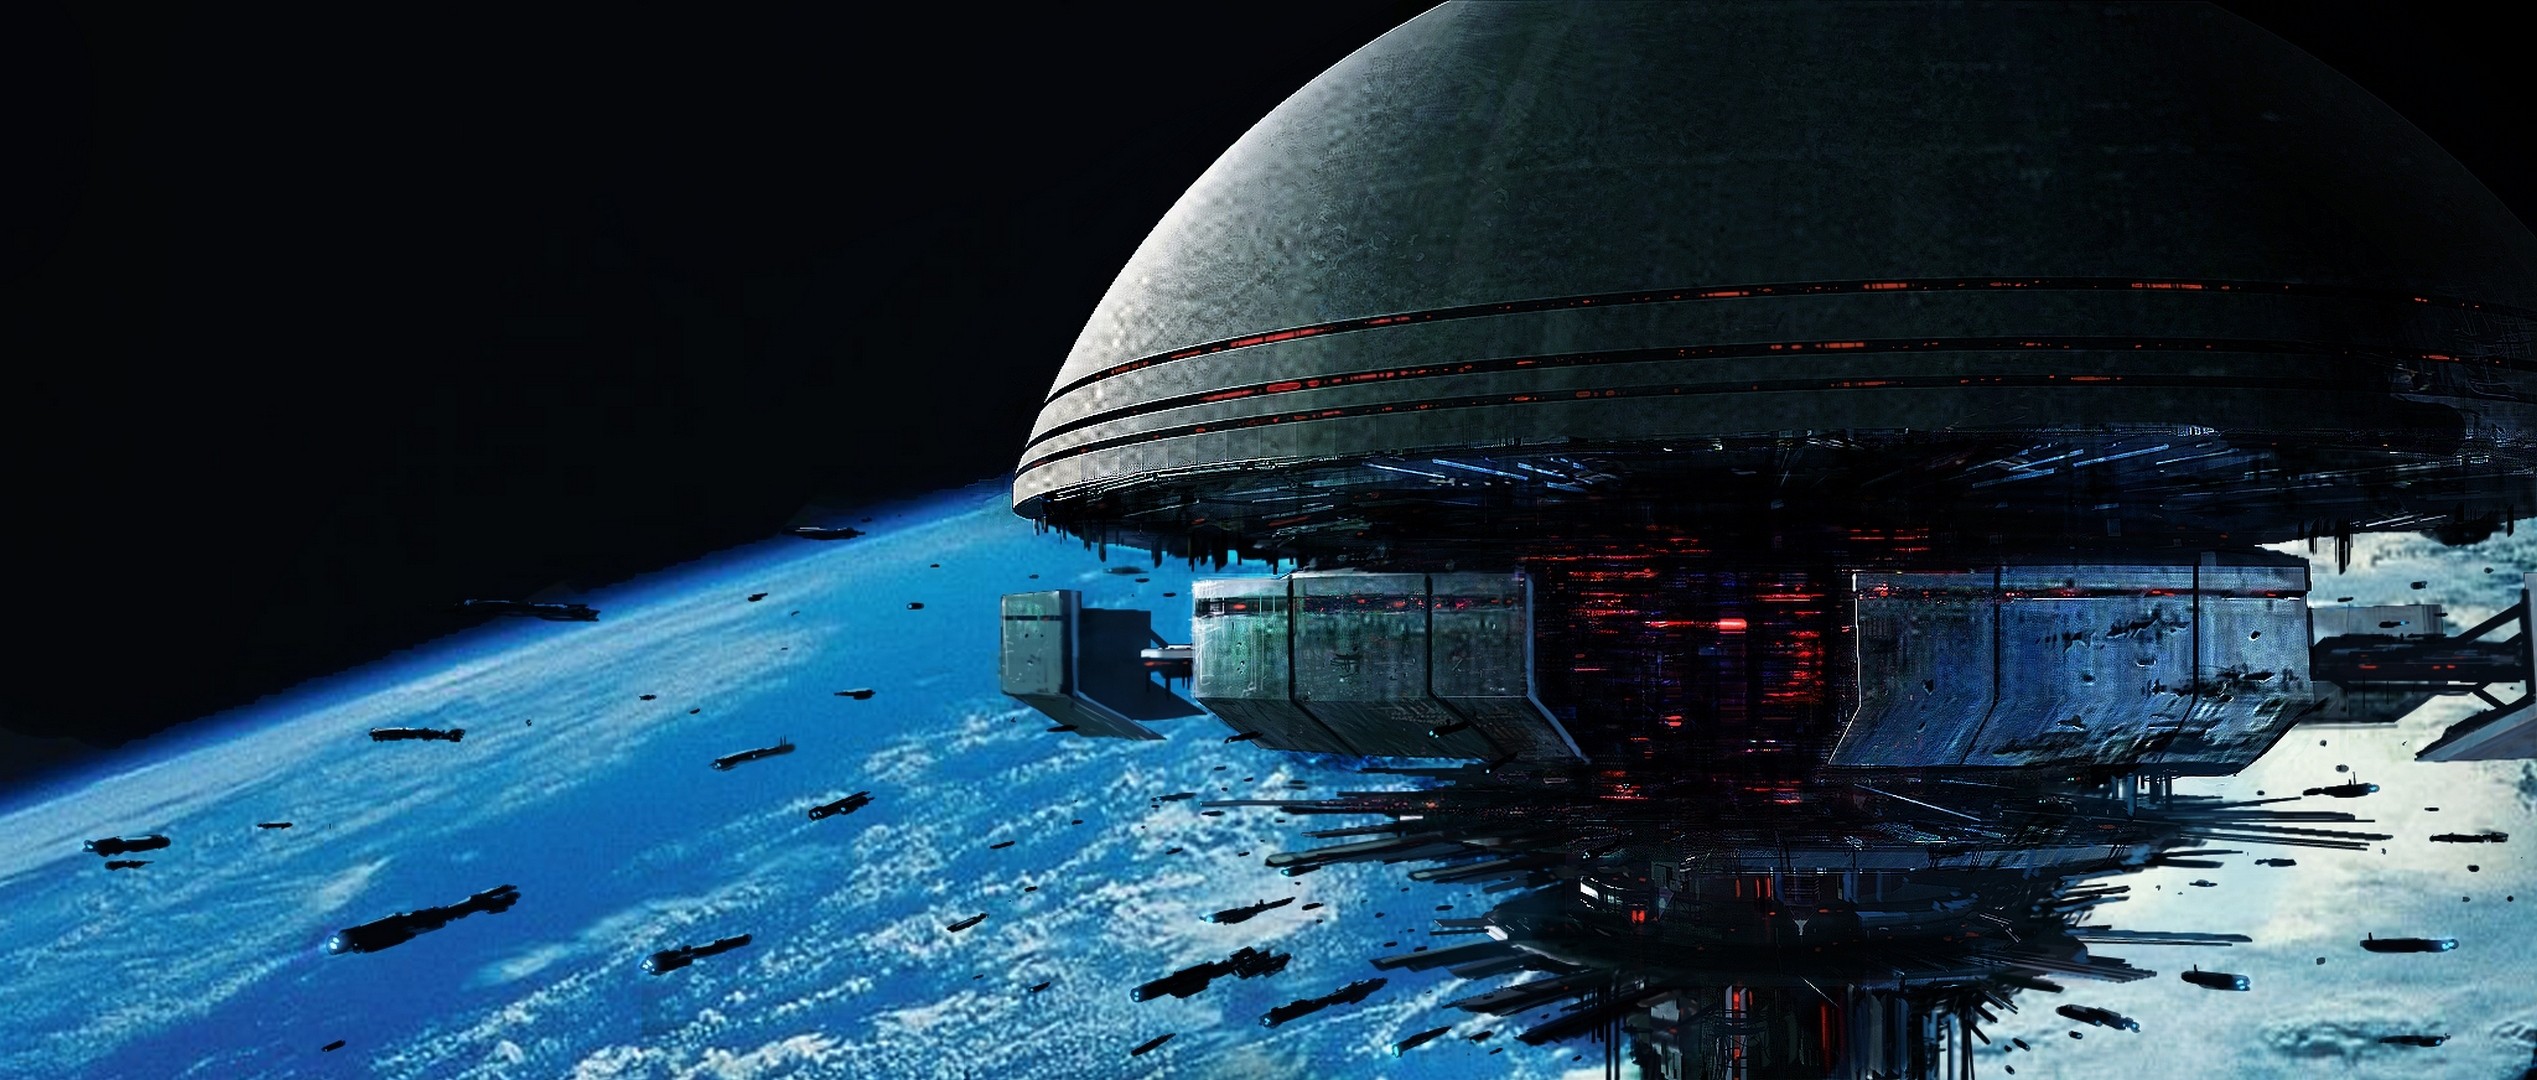 General 2537x1080 fantasy art futuristic science fiction planet space station